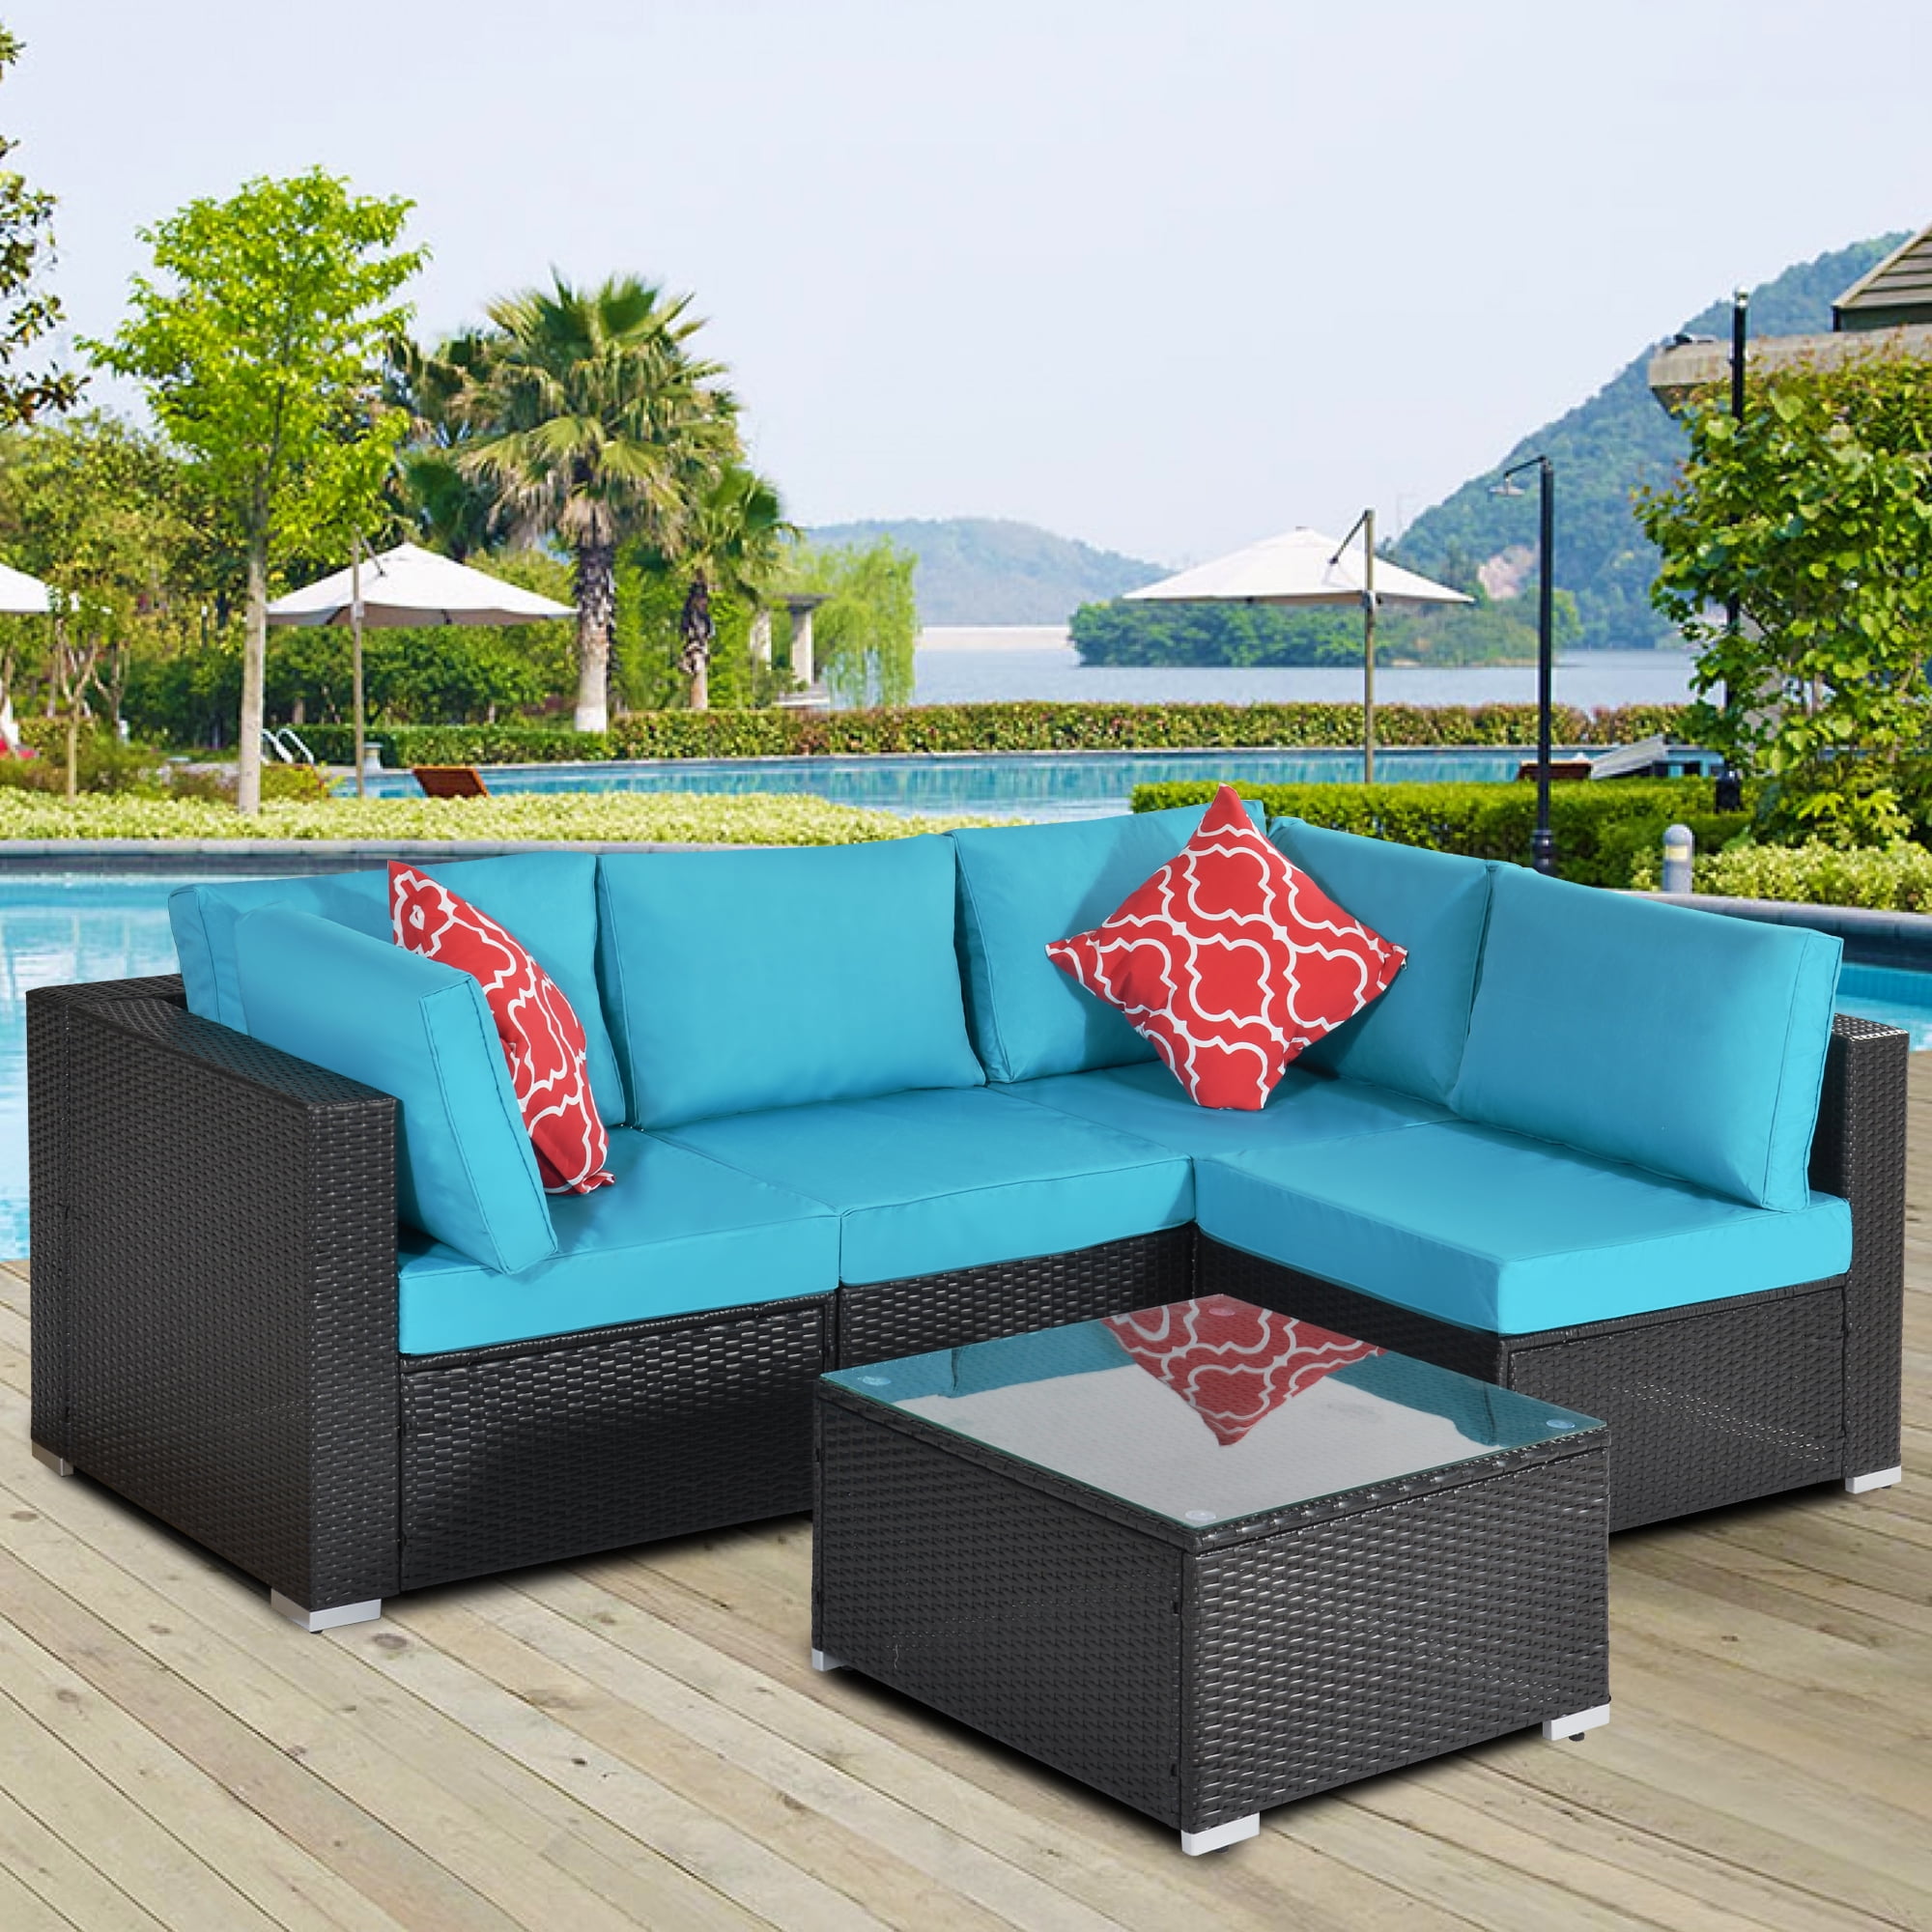 Patio Sectional Sofa Sets Clearance, 5 Piece Patio Furniture Sets with